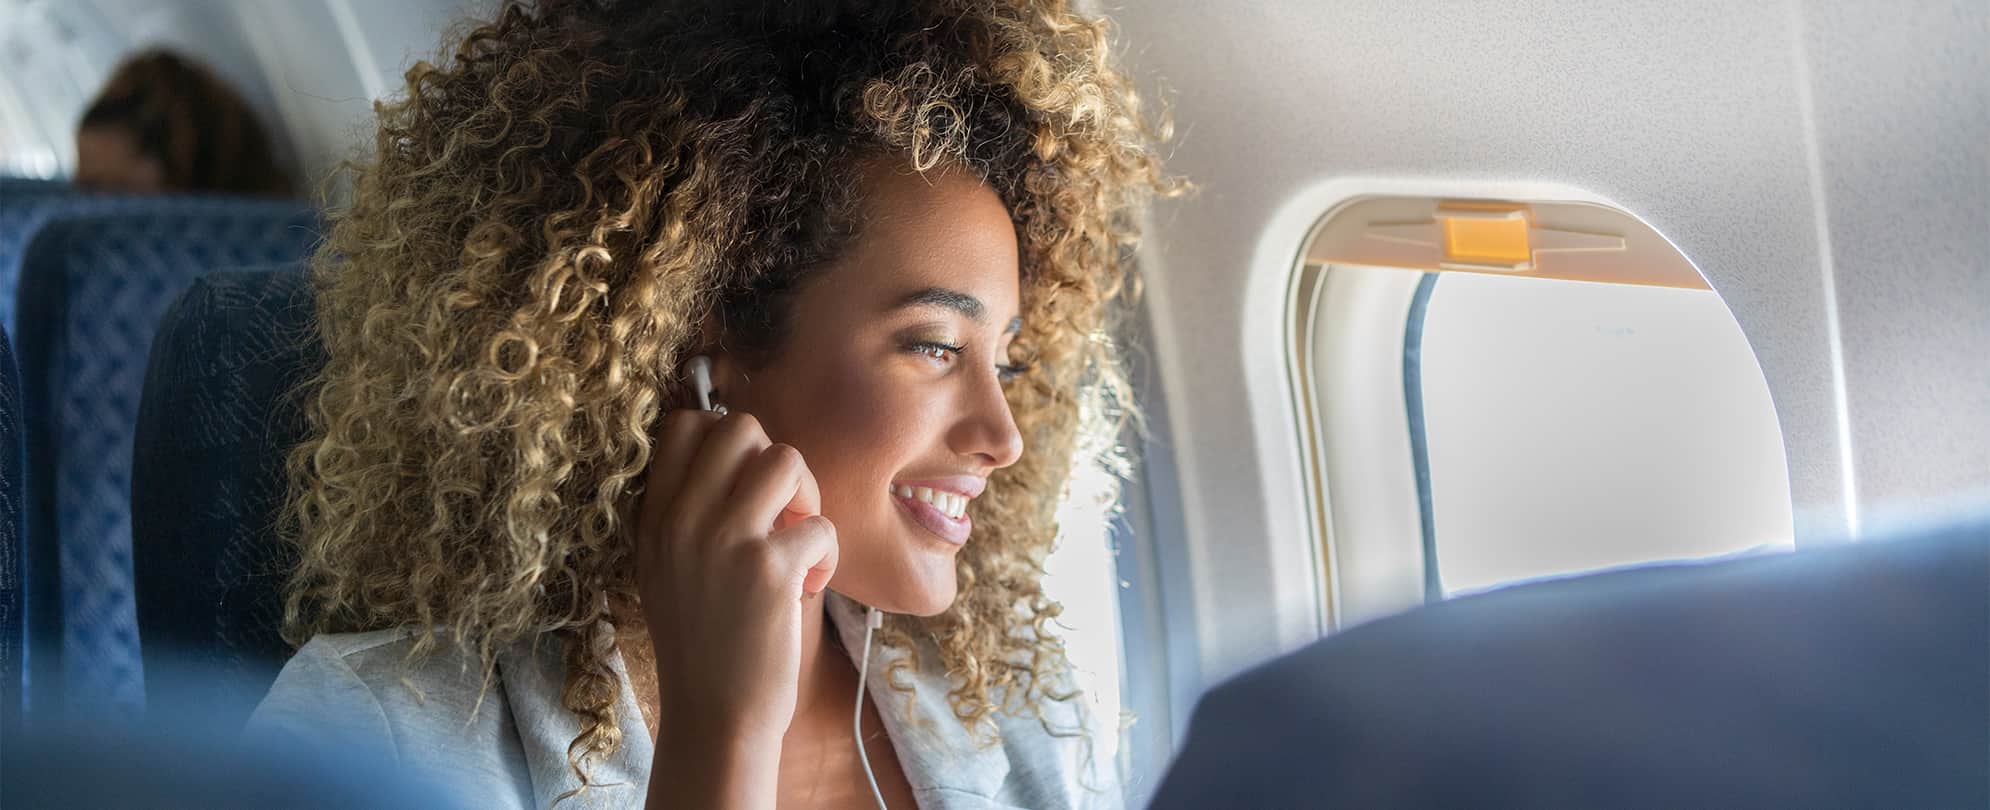 A woman with headphones in her ears, looking outside a plane window.